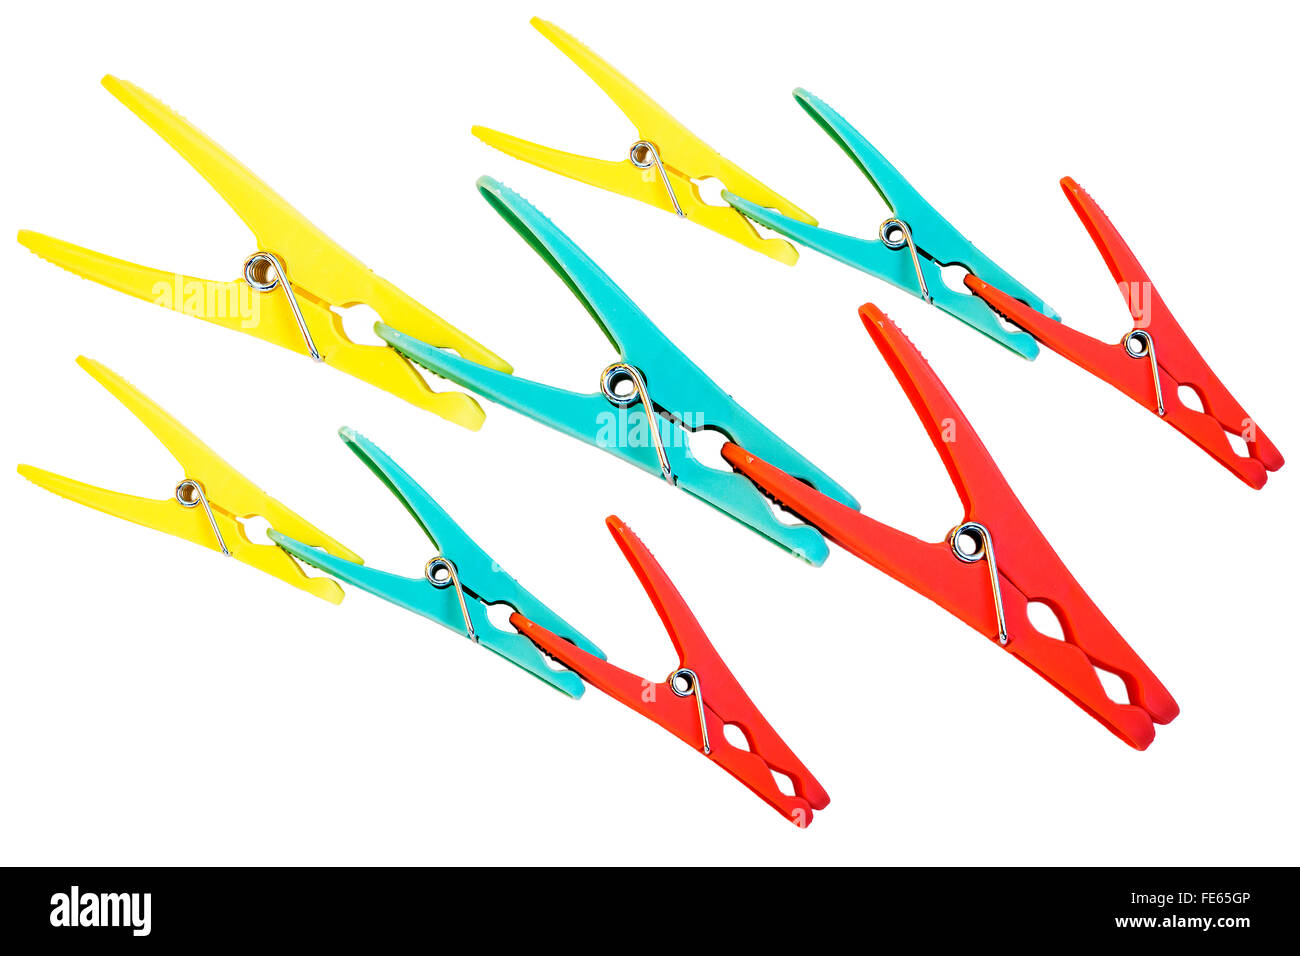 Nine coloured pegs clipped together against a white background Stock Photo